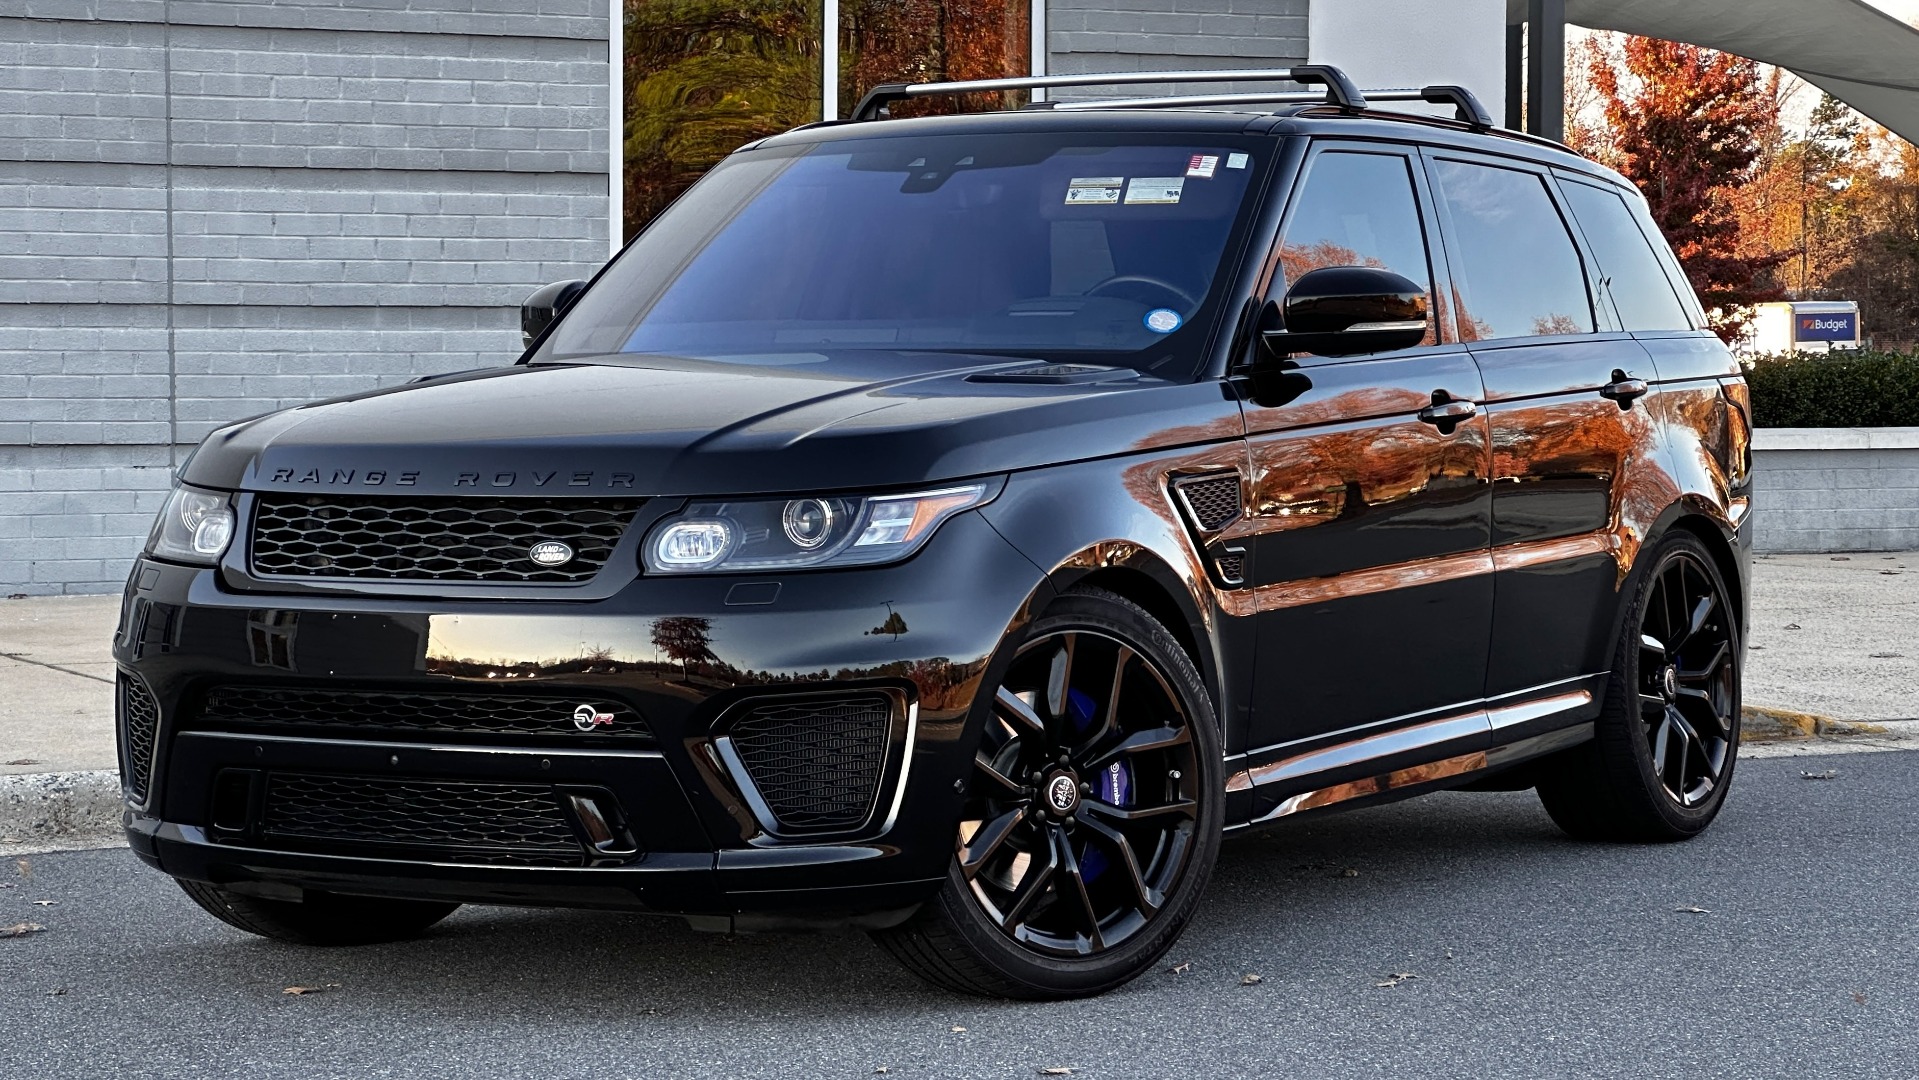 Used 2017 Land Rover Range Rover Sport SVR / DRIVE PRO PACKAGE / MERIDIAN SURROUND SOUND / SUPERCHARGED V8 / PANOR for sale Sold at Formula Imports in Charlotte NC 28227 1